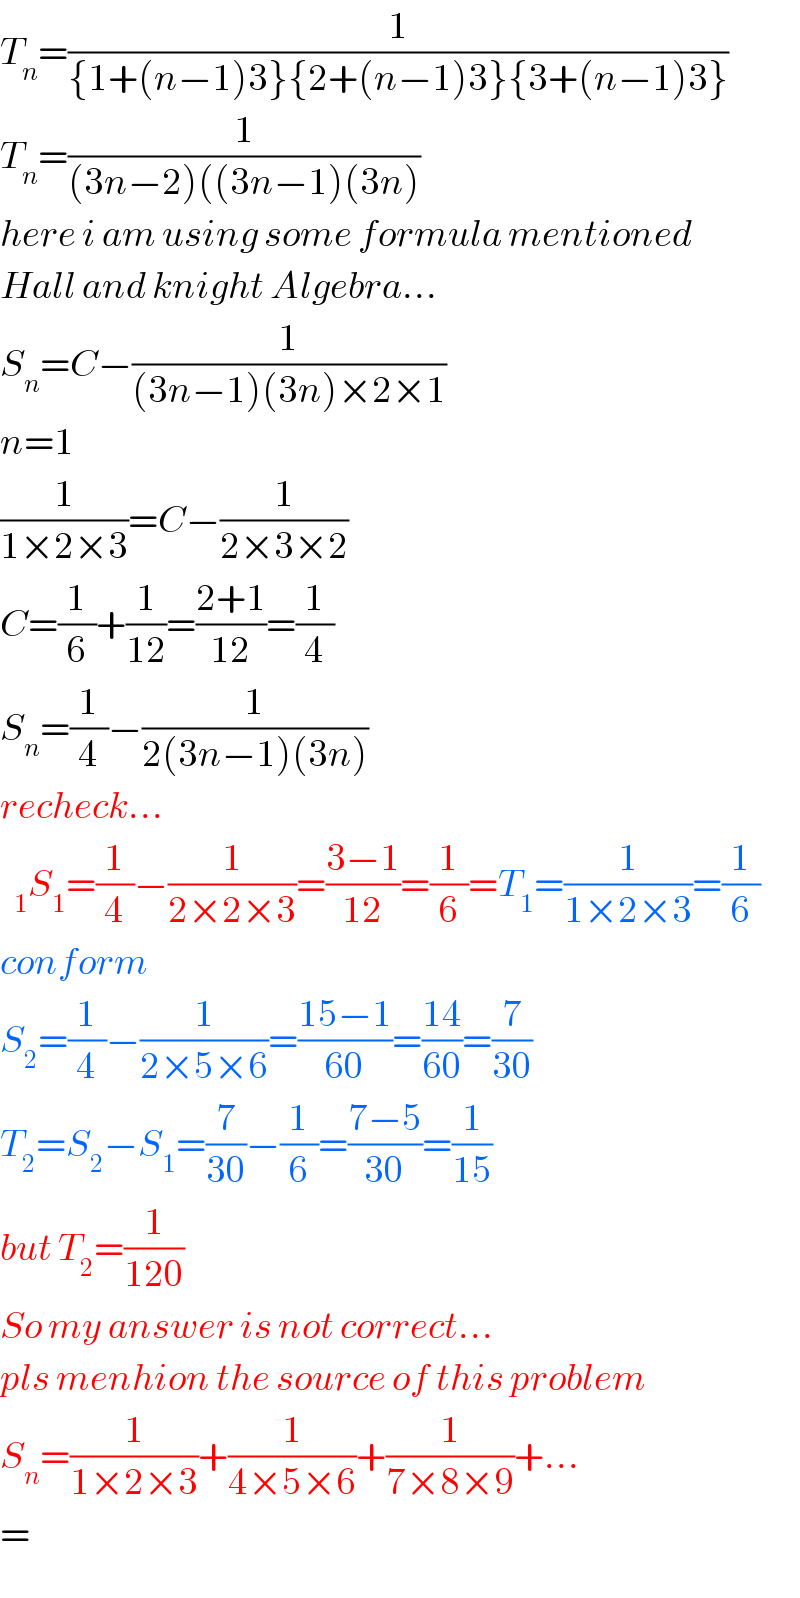 T_n =(1/({1+(n−1)3}{2+(n−1)3}{3+(n−1)3}))  T_n =(1/((3n−2)((3n−1)(3n)))  here i am using some formula mentioned  Hall and knight Algebra...  S_n =C−(1/((3n−1)(3n)×2×1))  n=1  (1/(1×2×3))=C−(1/(2×3×2))  C=(1/6)+(1/(12))=((2+1)/(12))=(1/4)  S_n =(1/4)−(1/(2(3n−1)(3n)))  recheck...  S_1 =(1/4)−(1/(2×2×3))=((3−1)/(12))=(1/6)=T_1 =(1/(1×2×3))=(1/6)  conform  S_2 =(1/4)−(1/(2×5×6))=((15−1)/(60))=((14)/(60))=(7/(30))  T_2 =S_2 −S_1 =(7/(30))−(1/6)=((7−5)/(30))=(1/(15))  but T_2 =(1/(120))  So my answer is not correct...  pls menhion the source of this problem  S_n =(1/(1×2×3))+(1/(4×5×6))+(1/(7×8×9))+...  =  